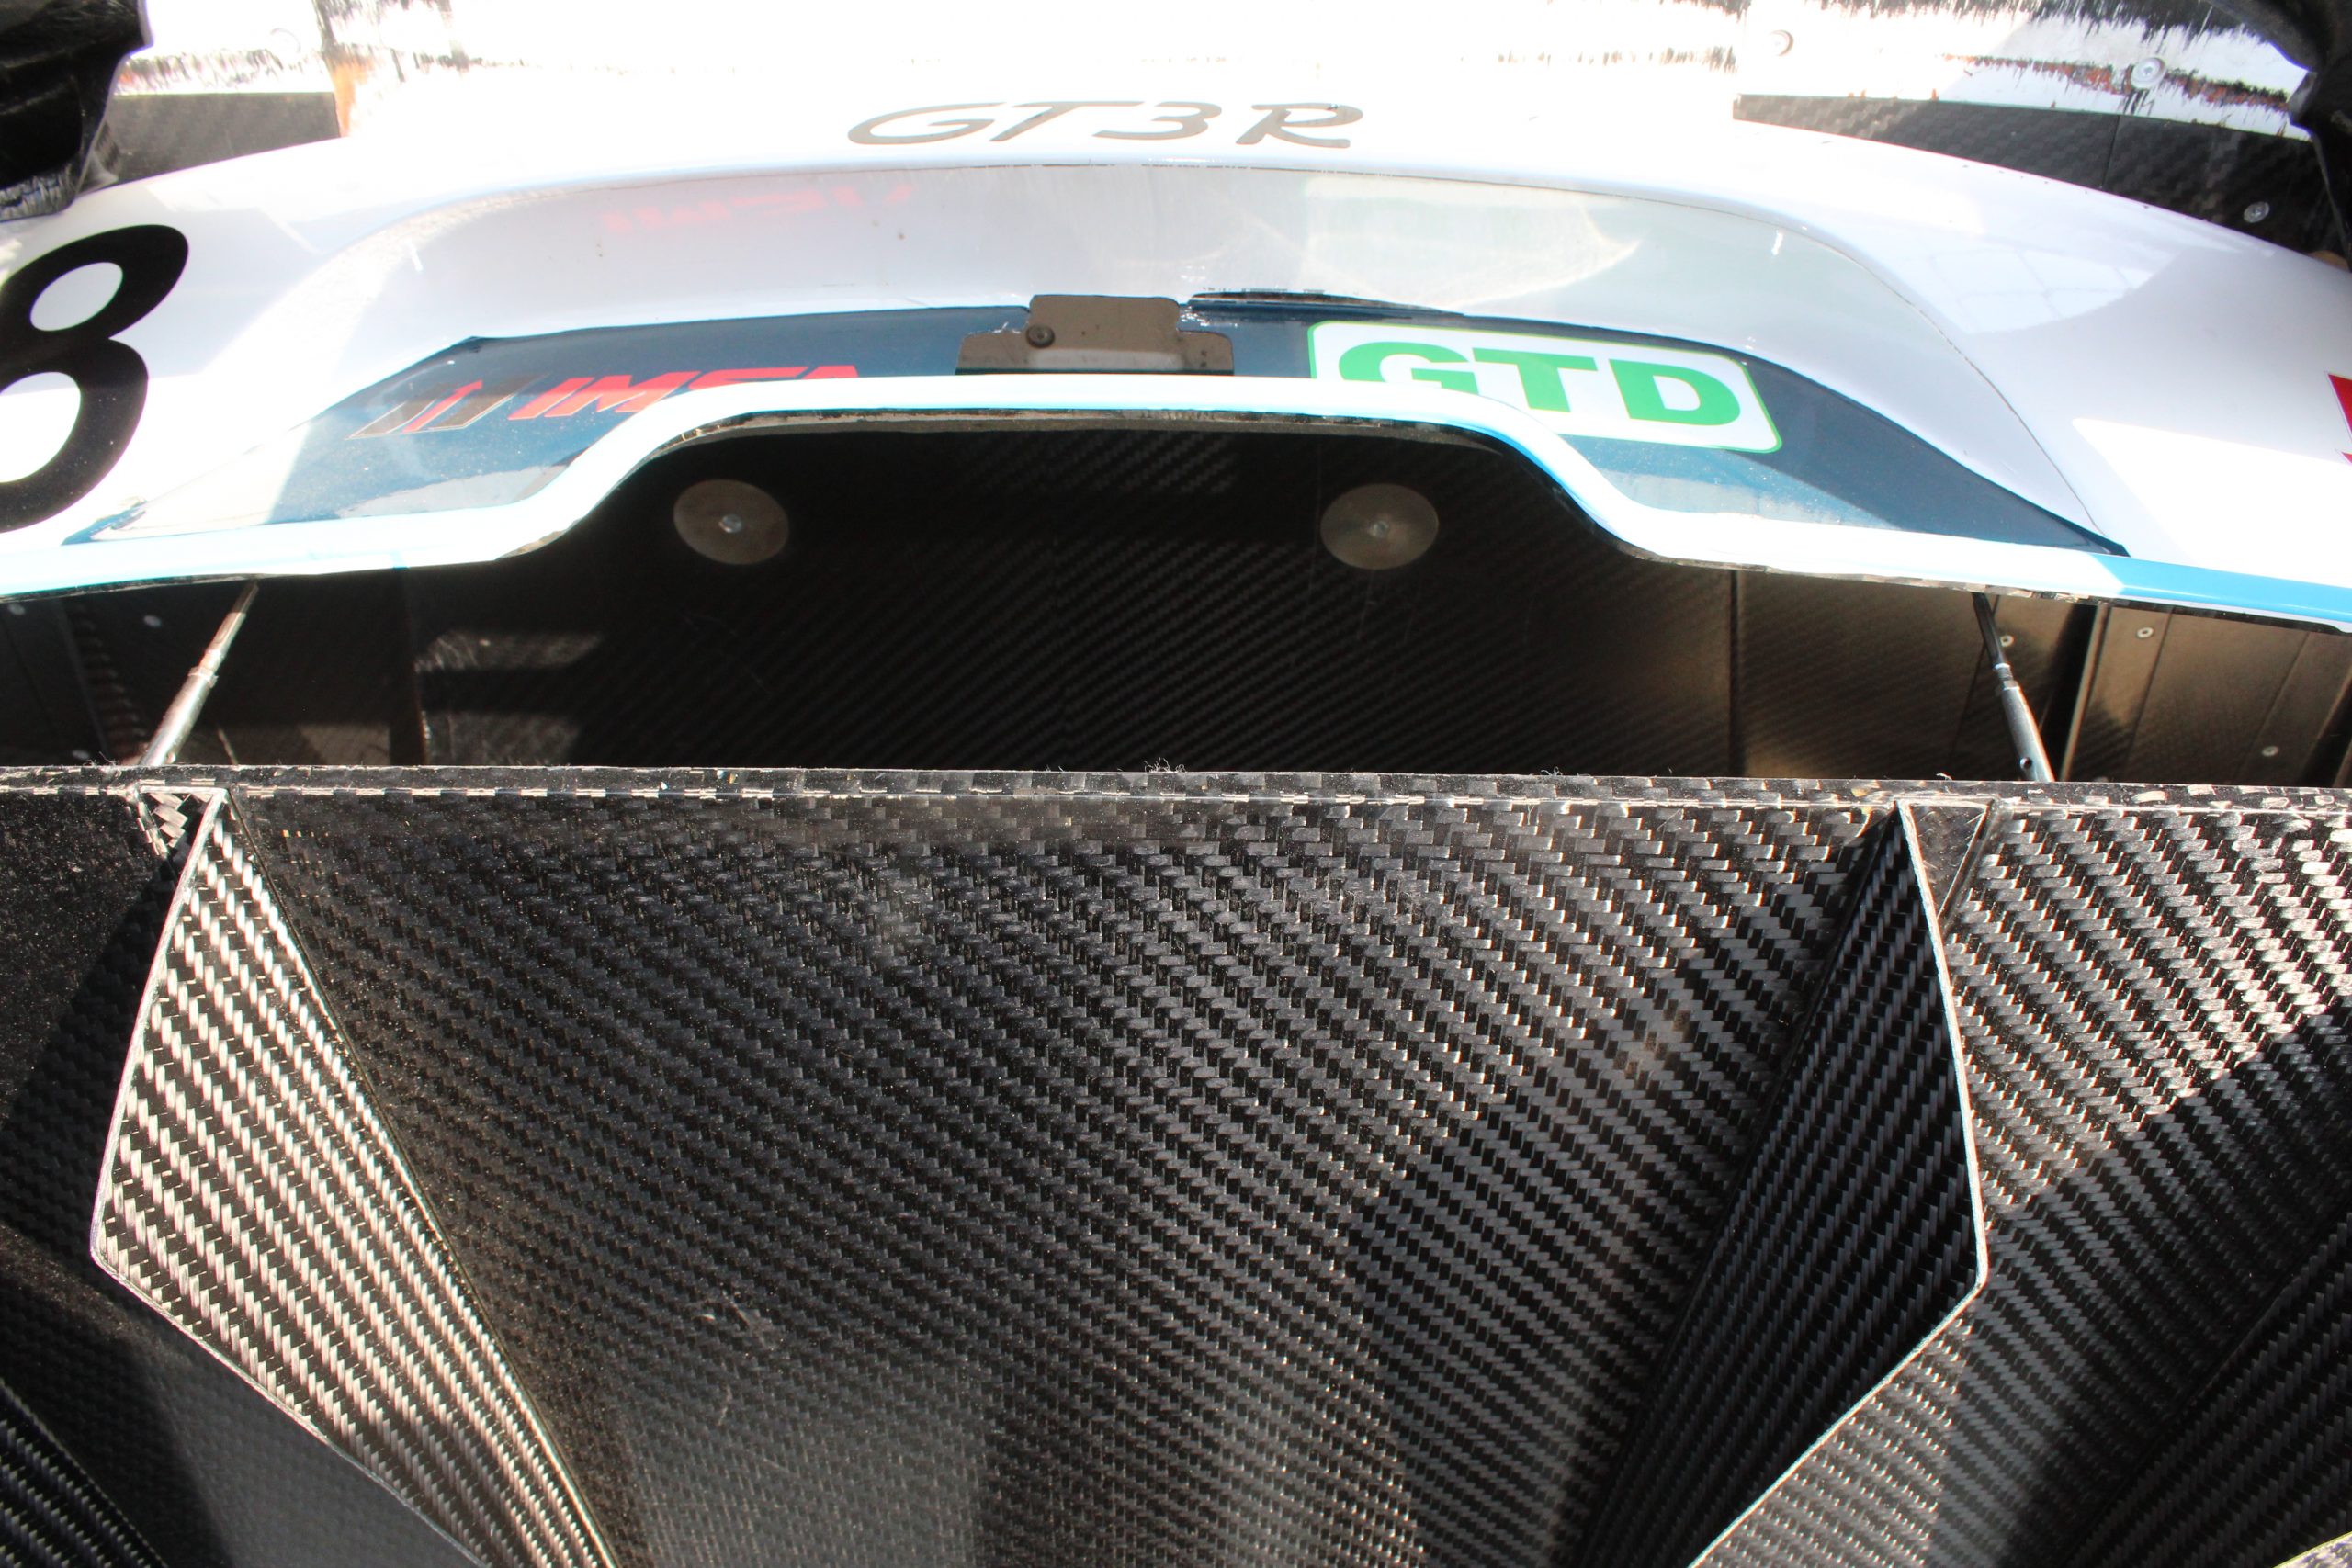 This carbon fiber rear diffuser and tail section show off the hi-tech nature of the current IMSA GTD class.